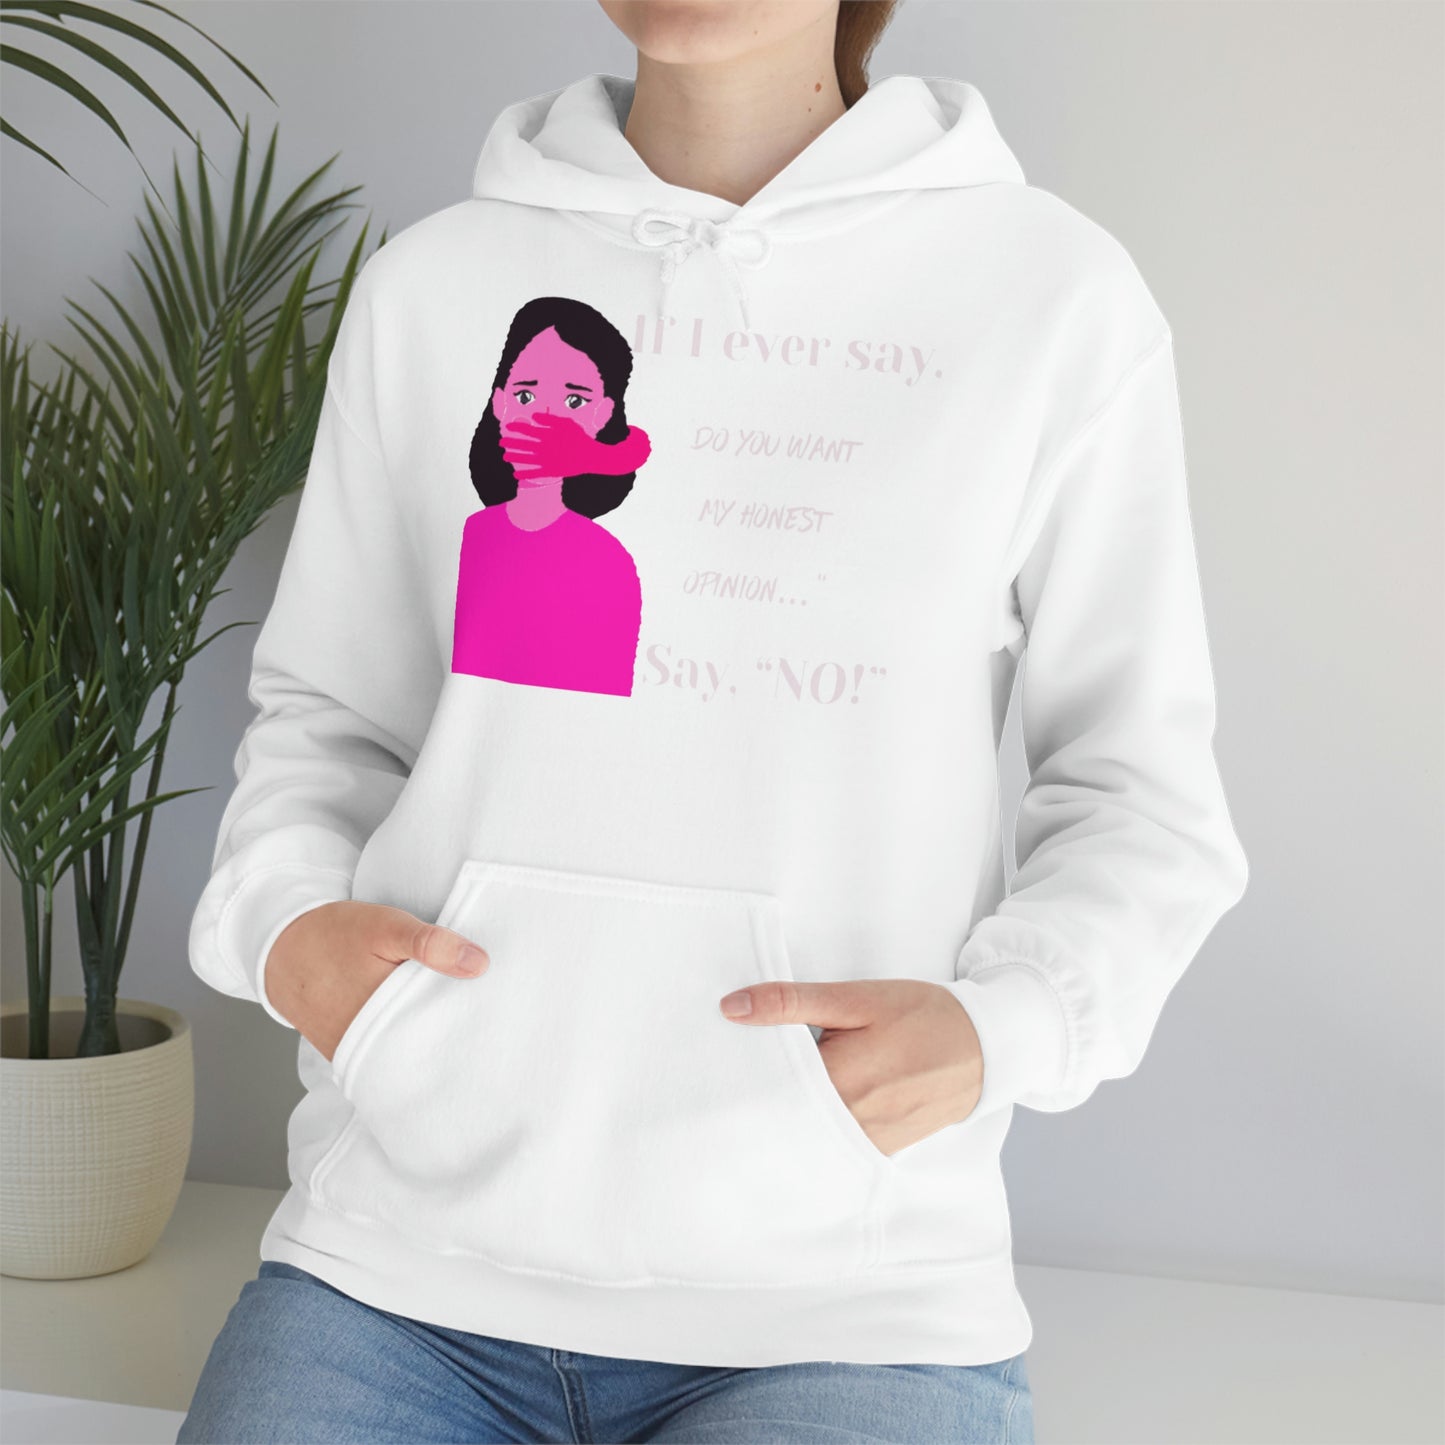 ‘If I ever say “do you want my opinion,” Say NO!” Unisex Heavy Blend™ Hooded Sweatshirt